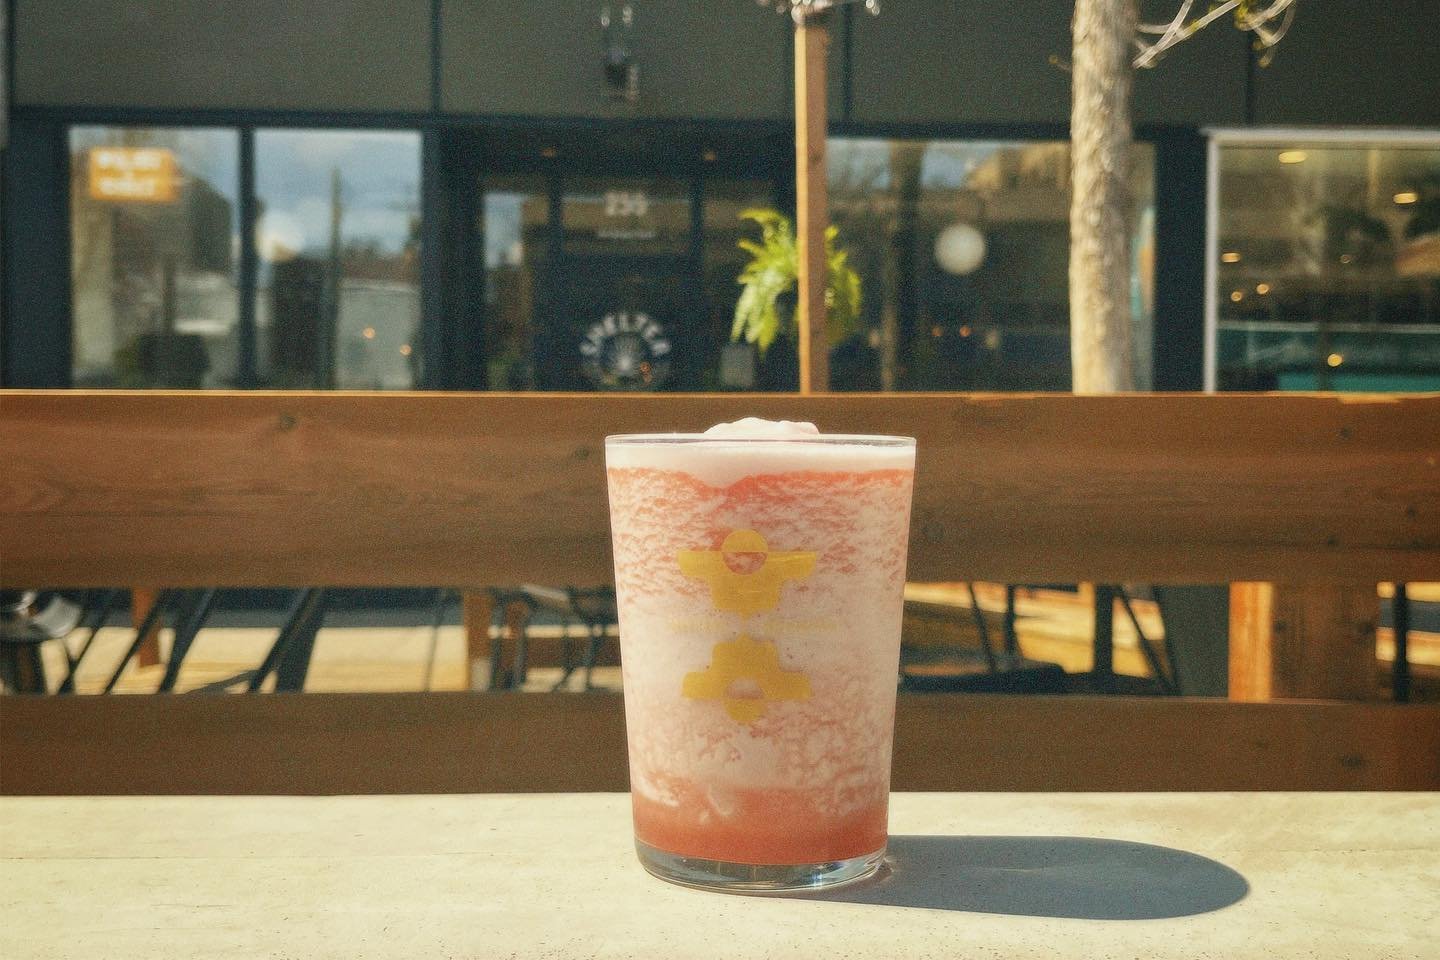 PATIO IS UP AND SLUSH IS BACK 

❤️&zwj;🔥❤️&zwj;🔥❤️&zwj;🔥❤️&zwj;🔥❤️&zwj;🔥 

the patio is all set up folks !!!! it&rsquo;s May and the weather is nice and the sun is HOT 

RASPBERRY MINT LEMONADE BEER SLUSH IS POURING 

see ya at 3 friends !!!!! ?